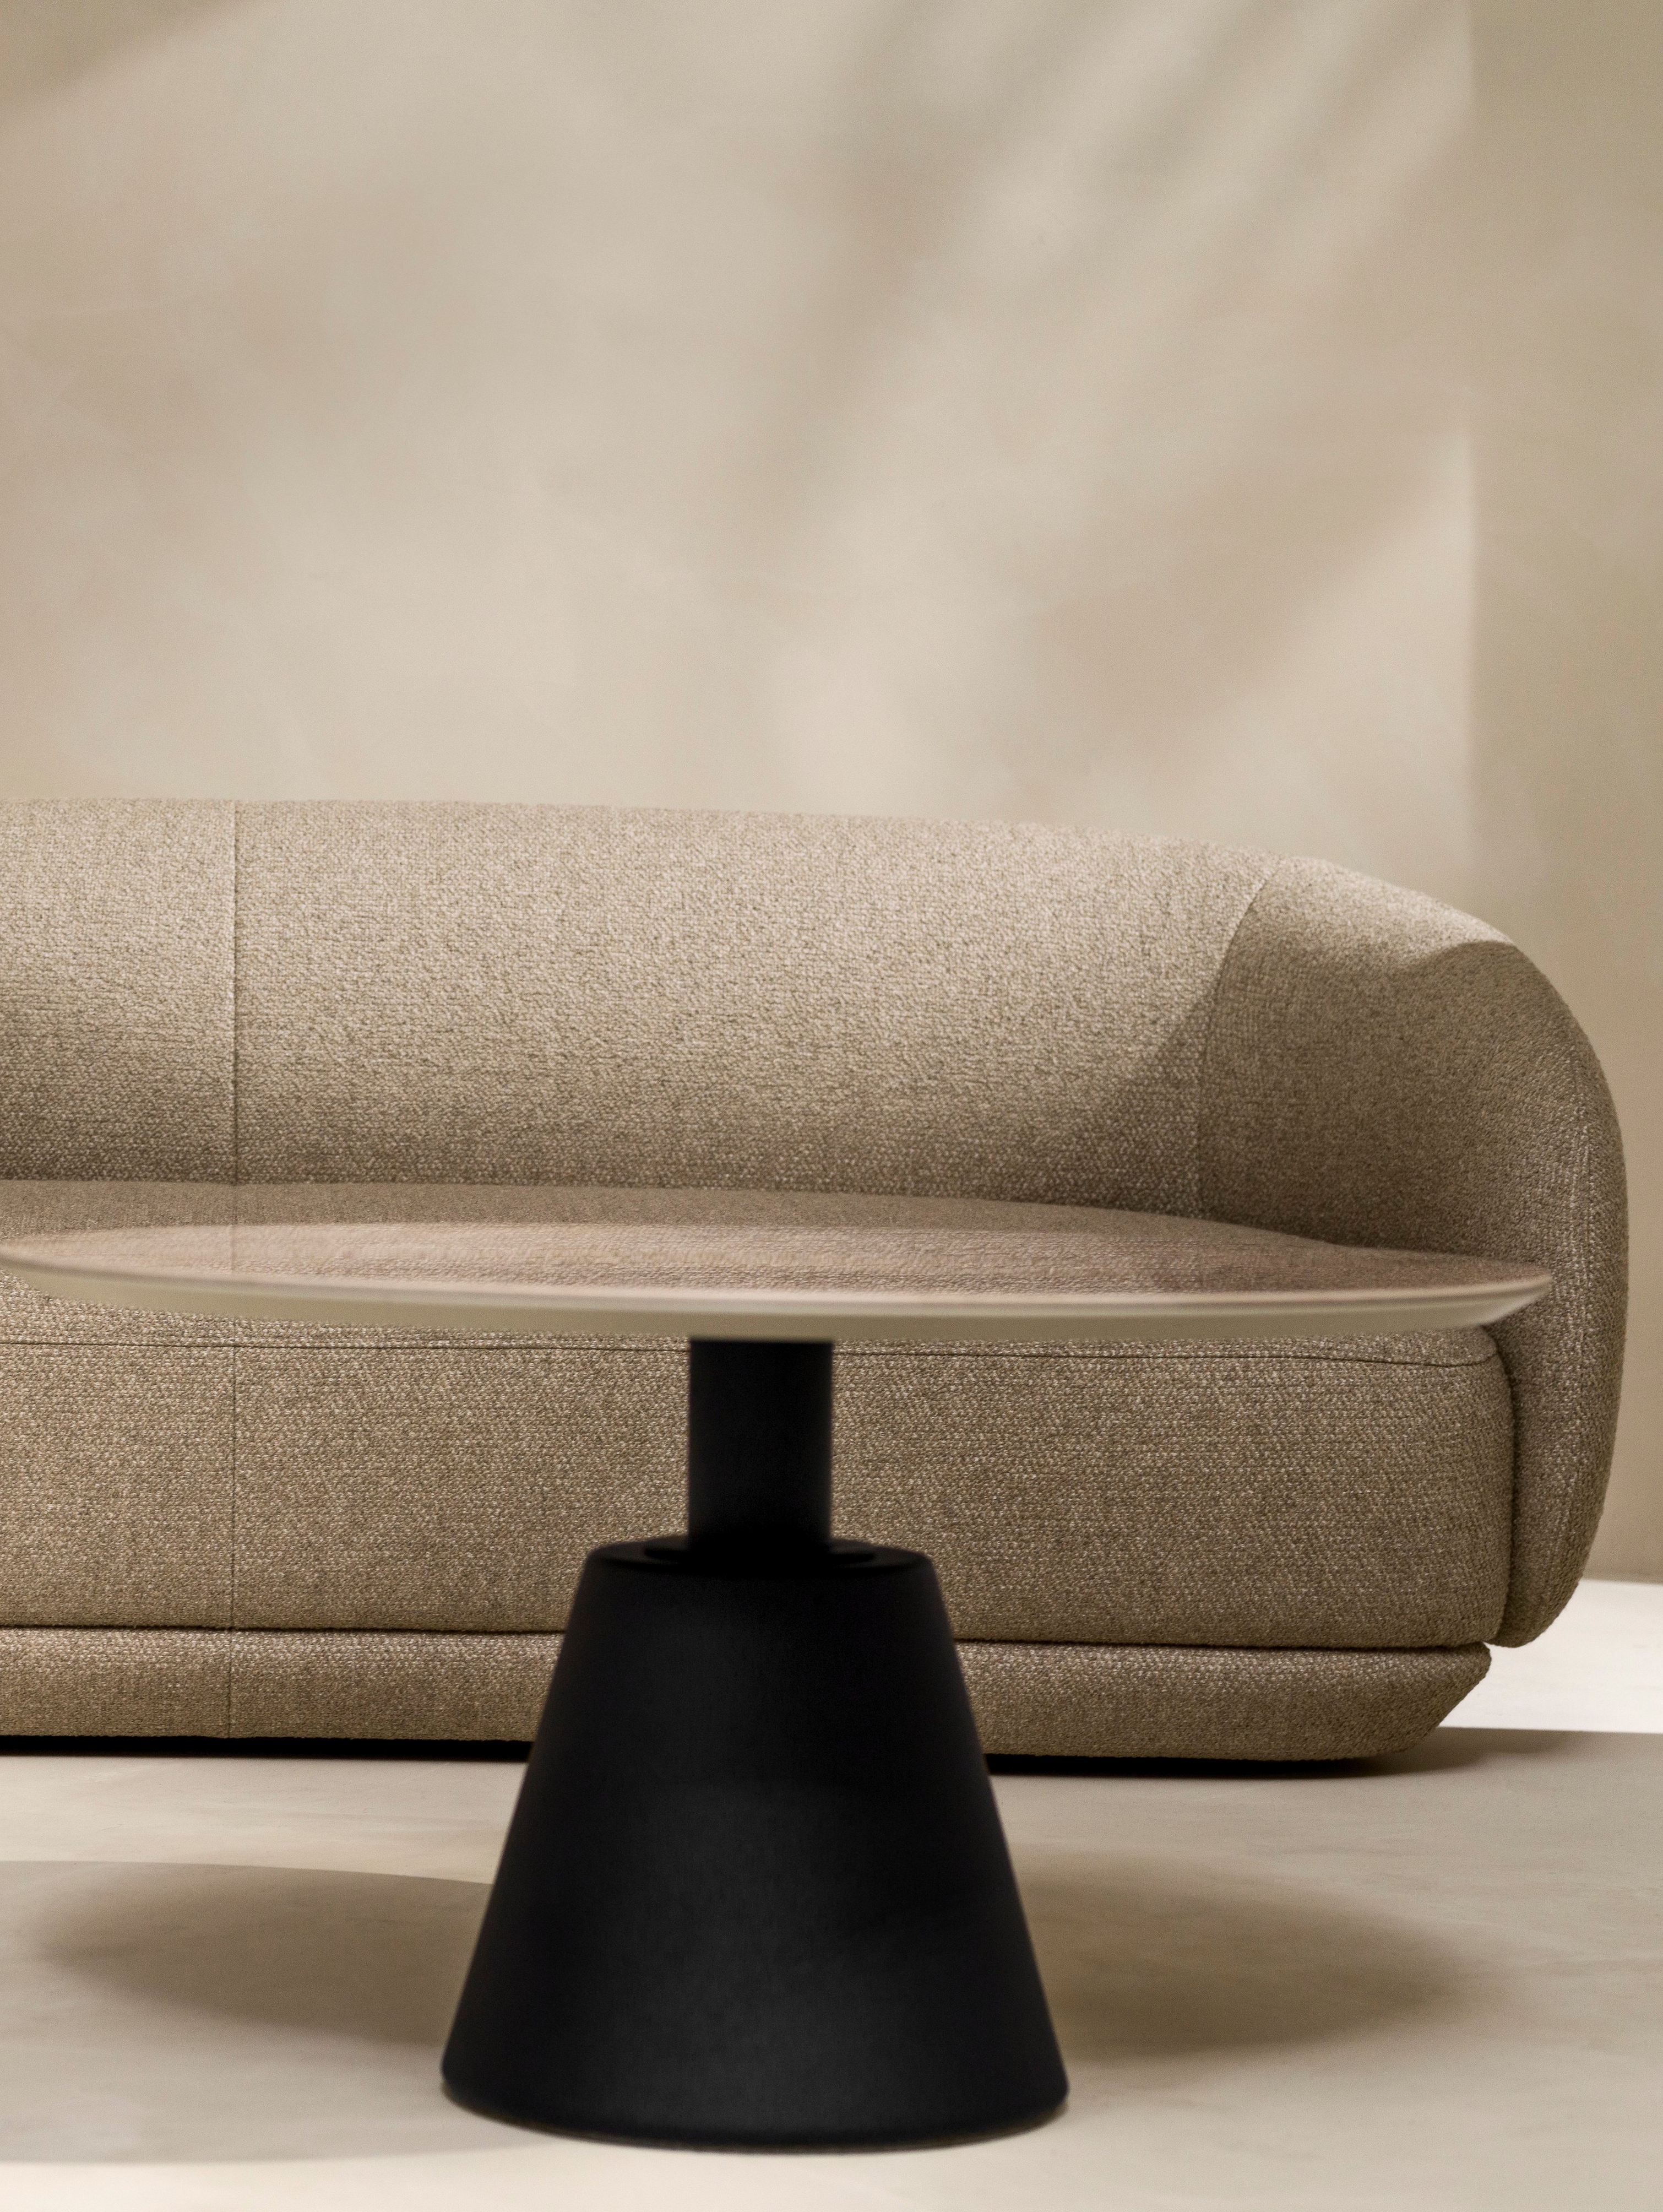 The Bolzano sofa in a nice plain room with the Madrid coffee table.